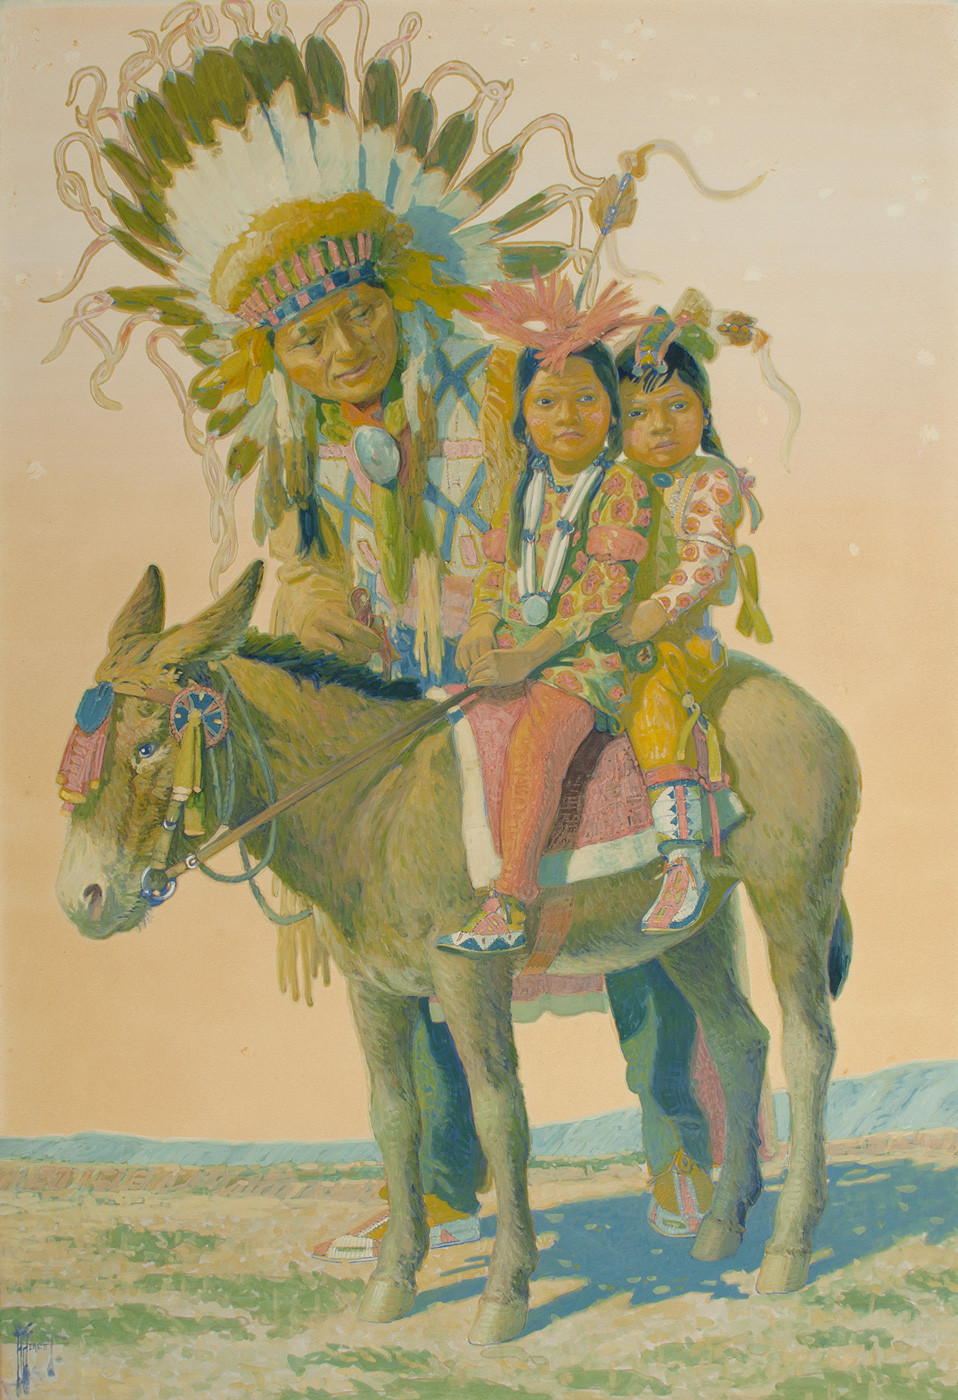 An Oglala man leans over two young children seated on a donkey.